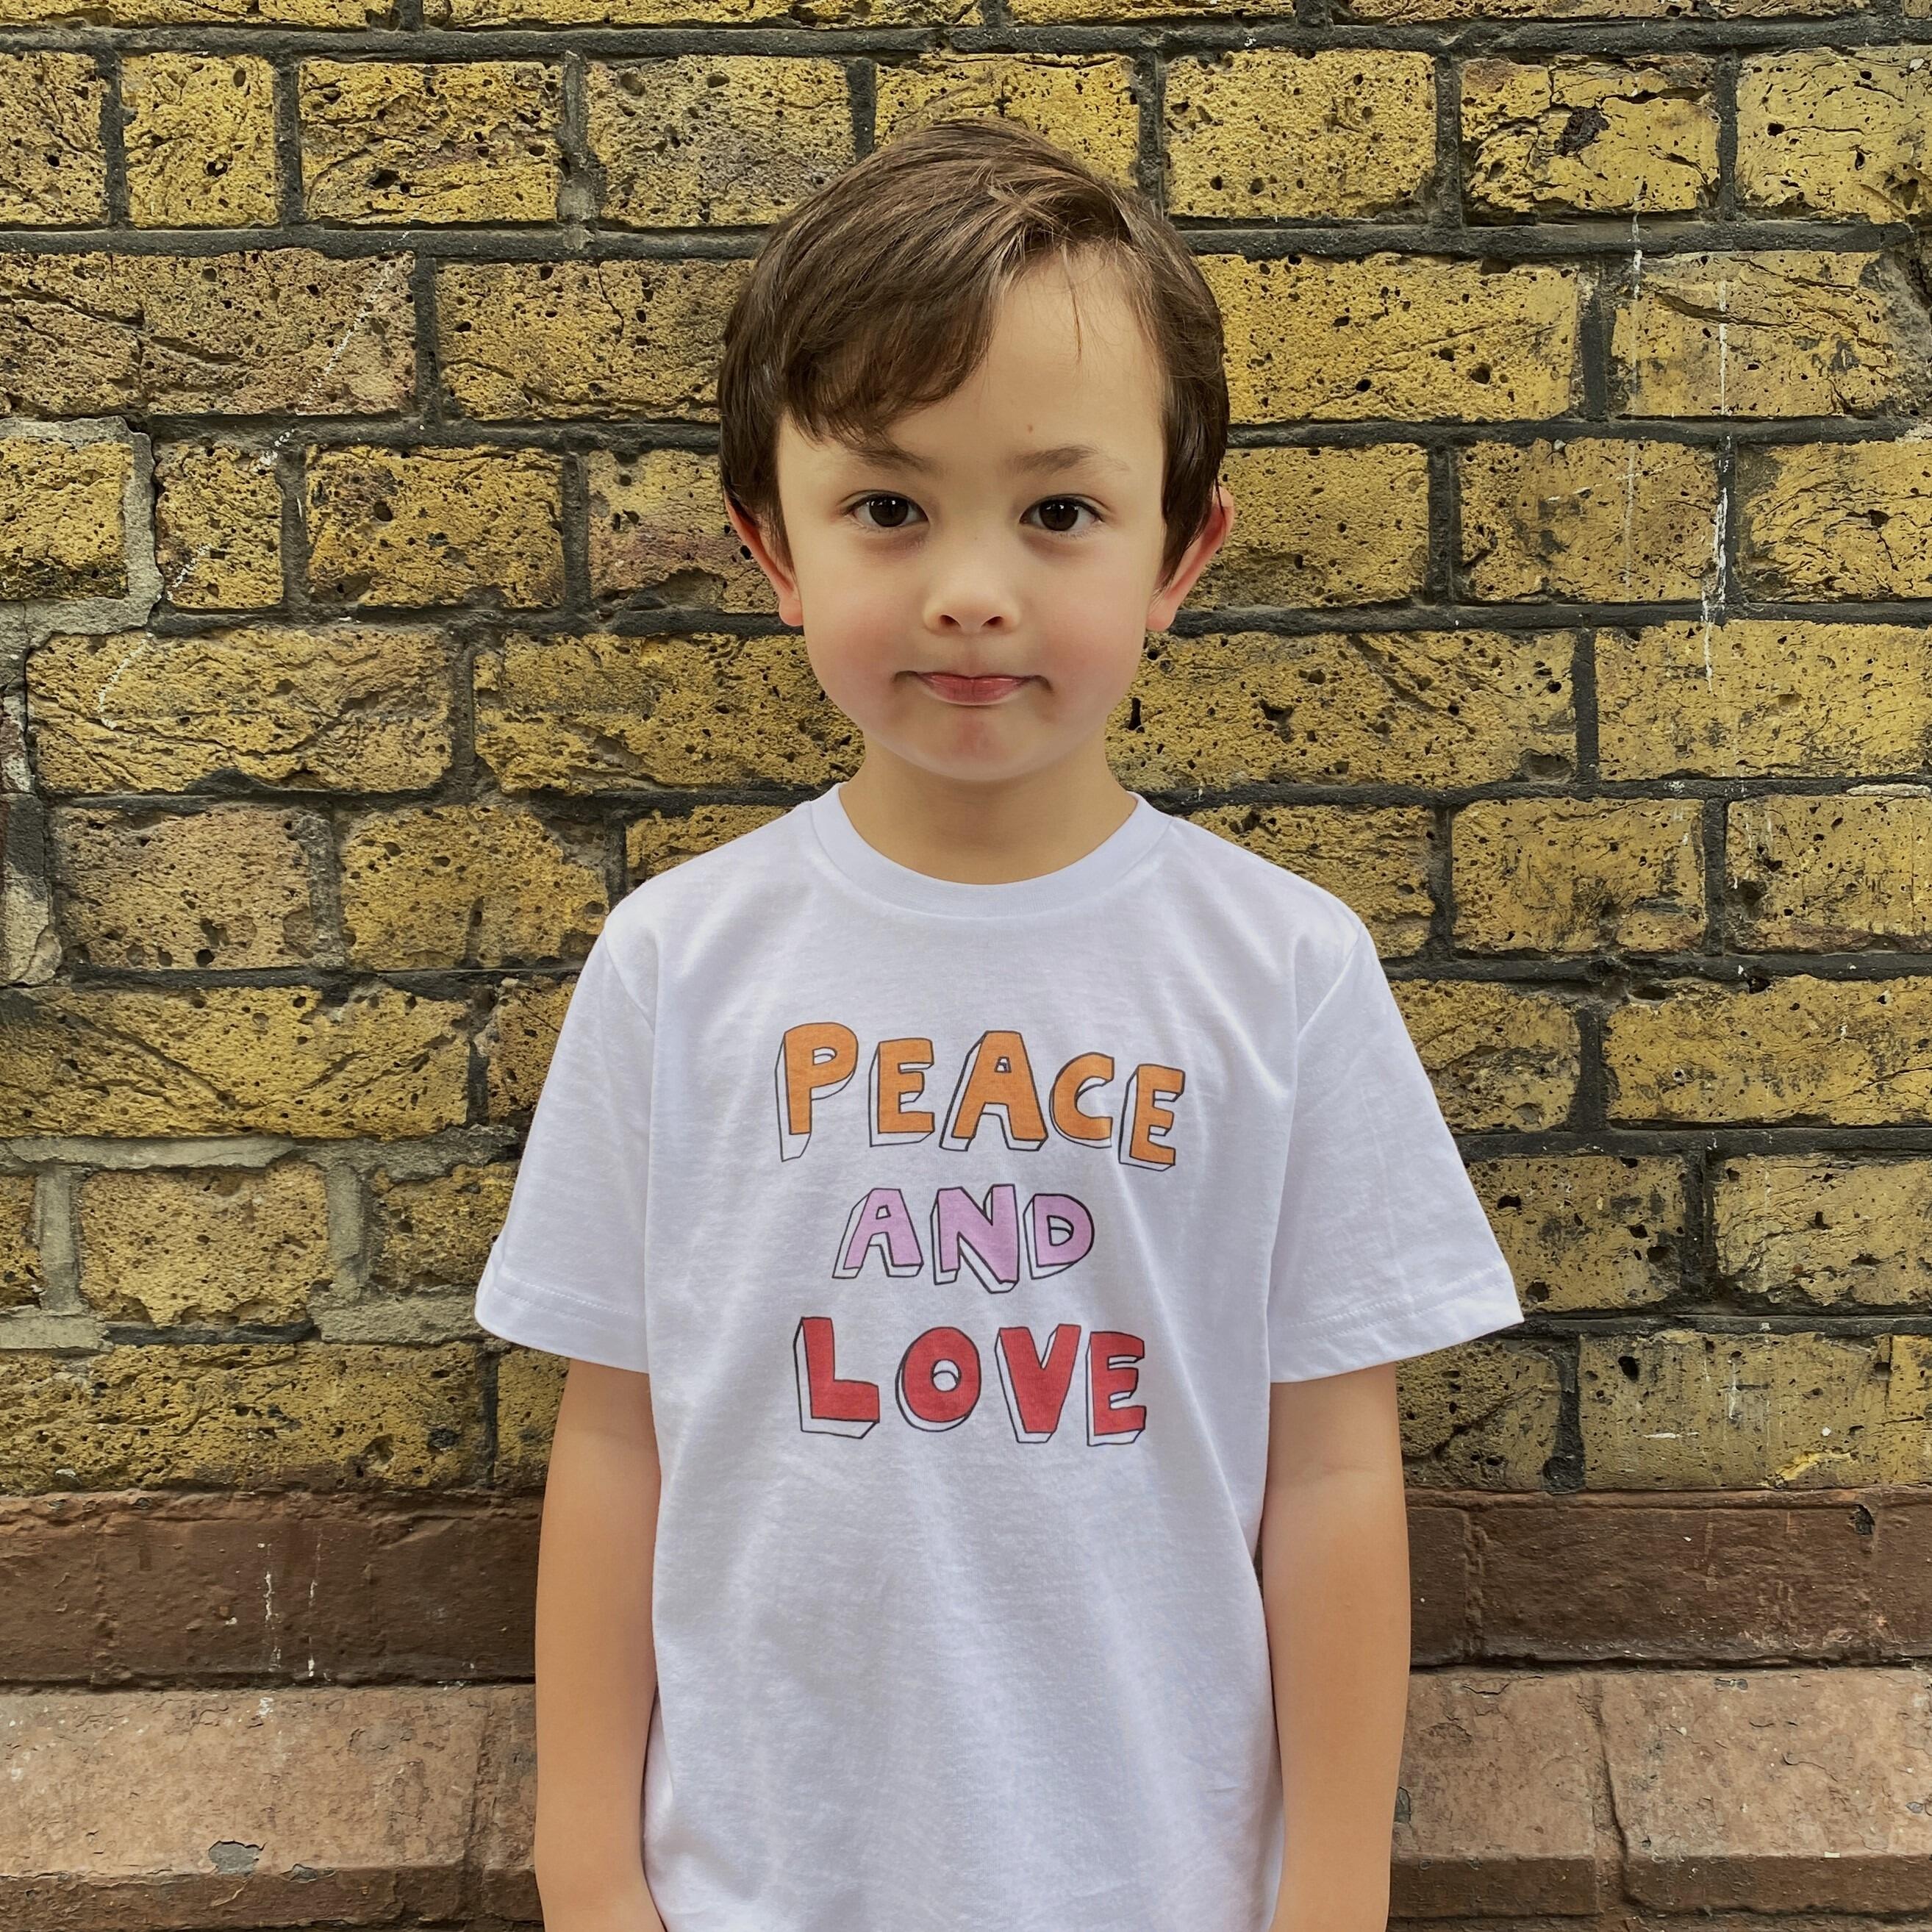 A child wearing the Peace and Love t-shirt.